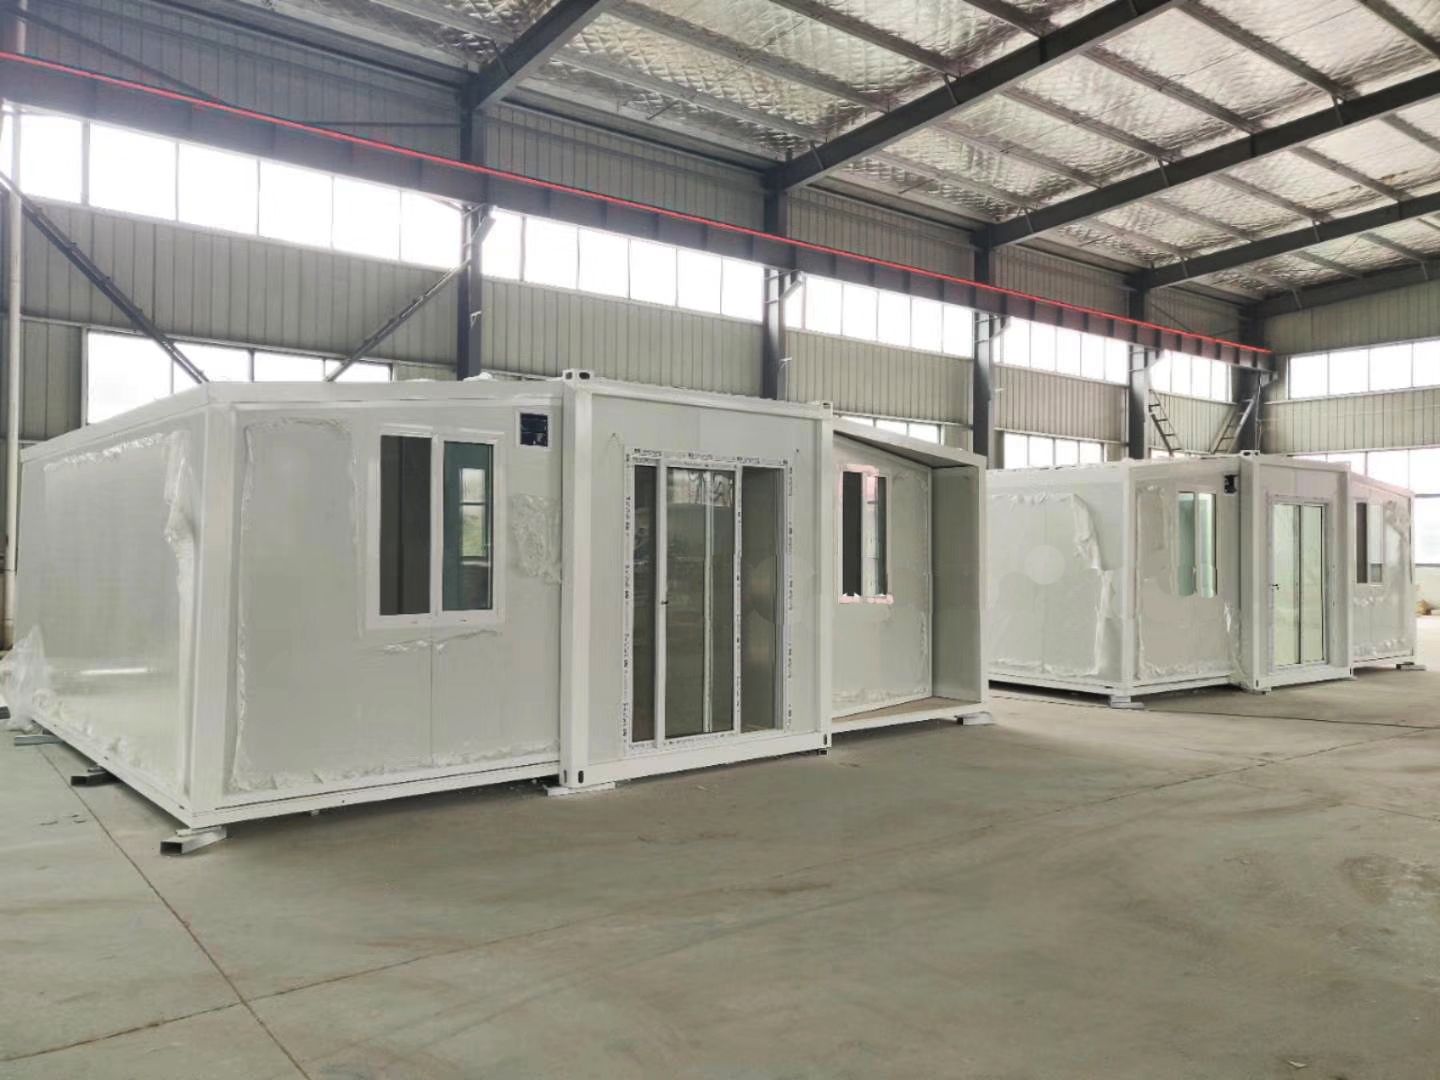 Customized 20/40FT Expandable Prefab Prefabricated Modular Living Portable Container House Office Container